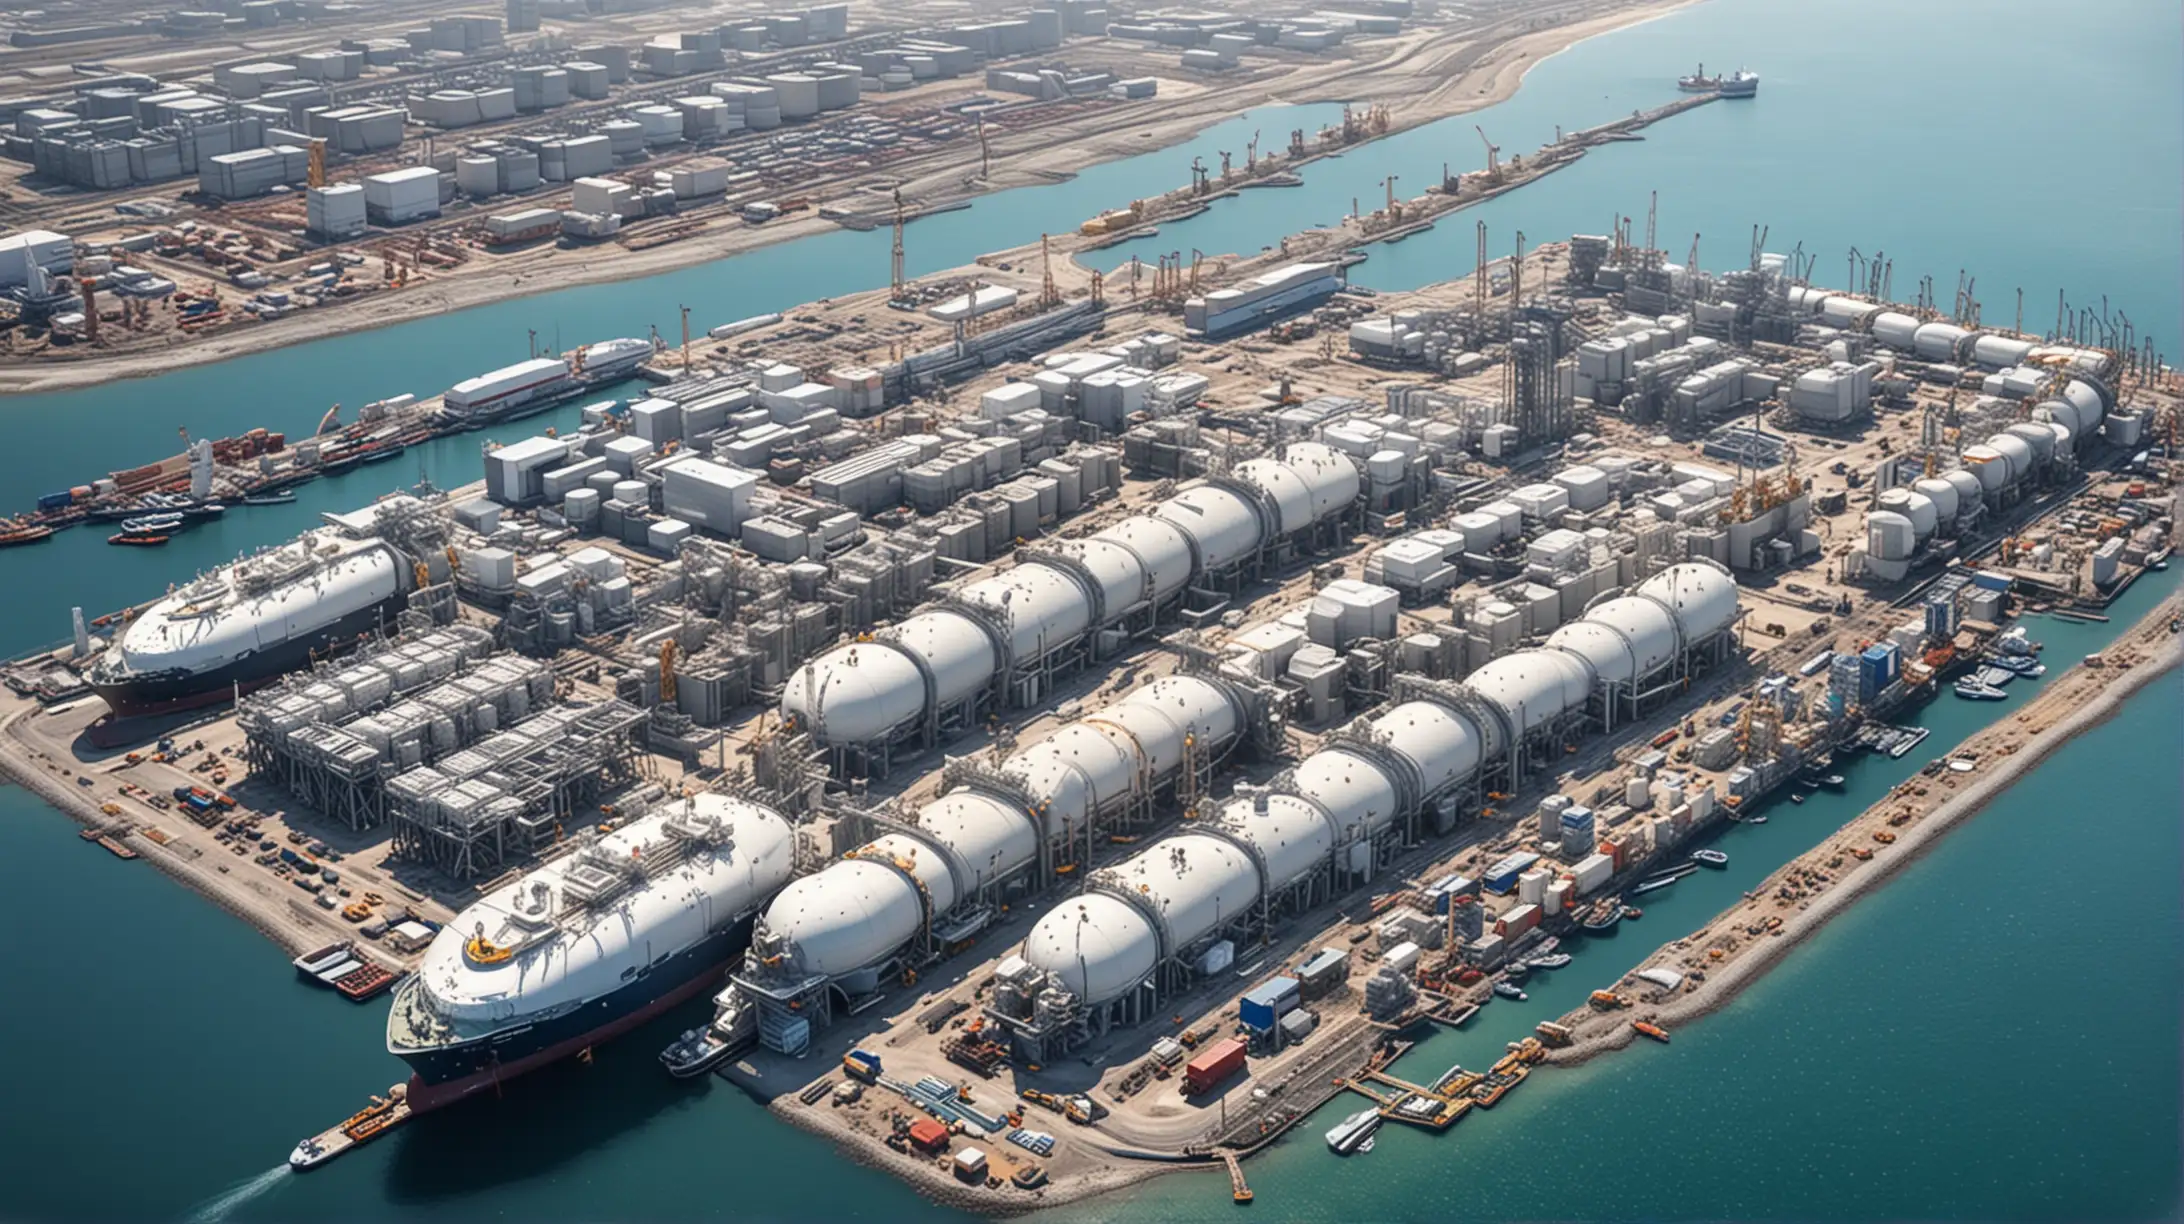 futuristic largest LNG Construction in the world, very complex and sophisticated